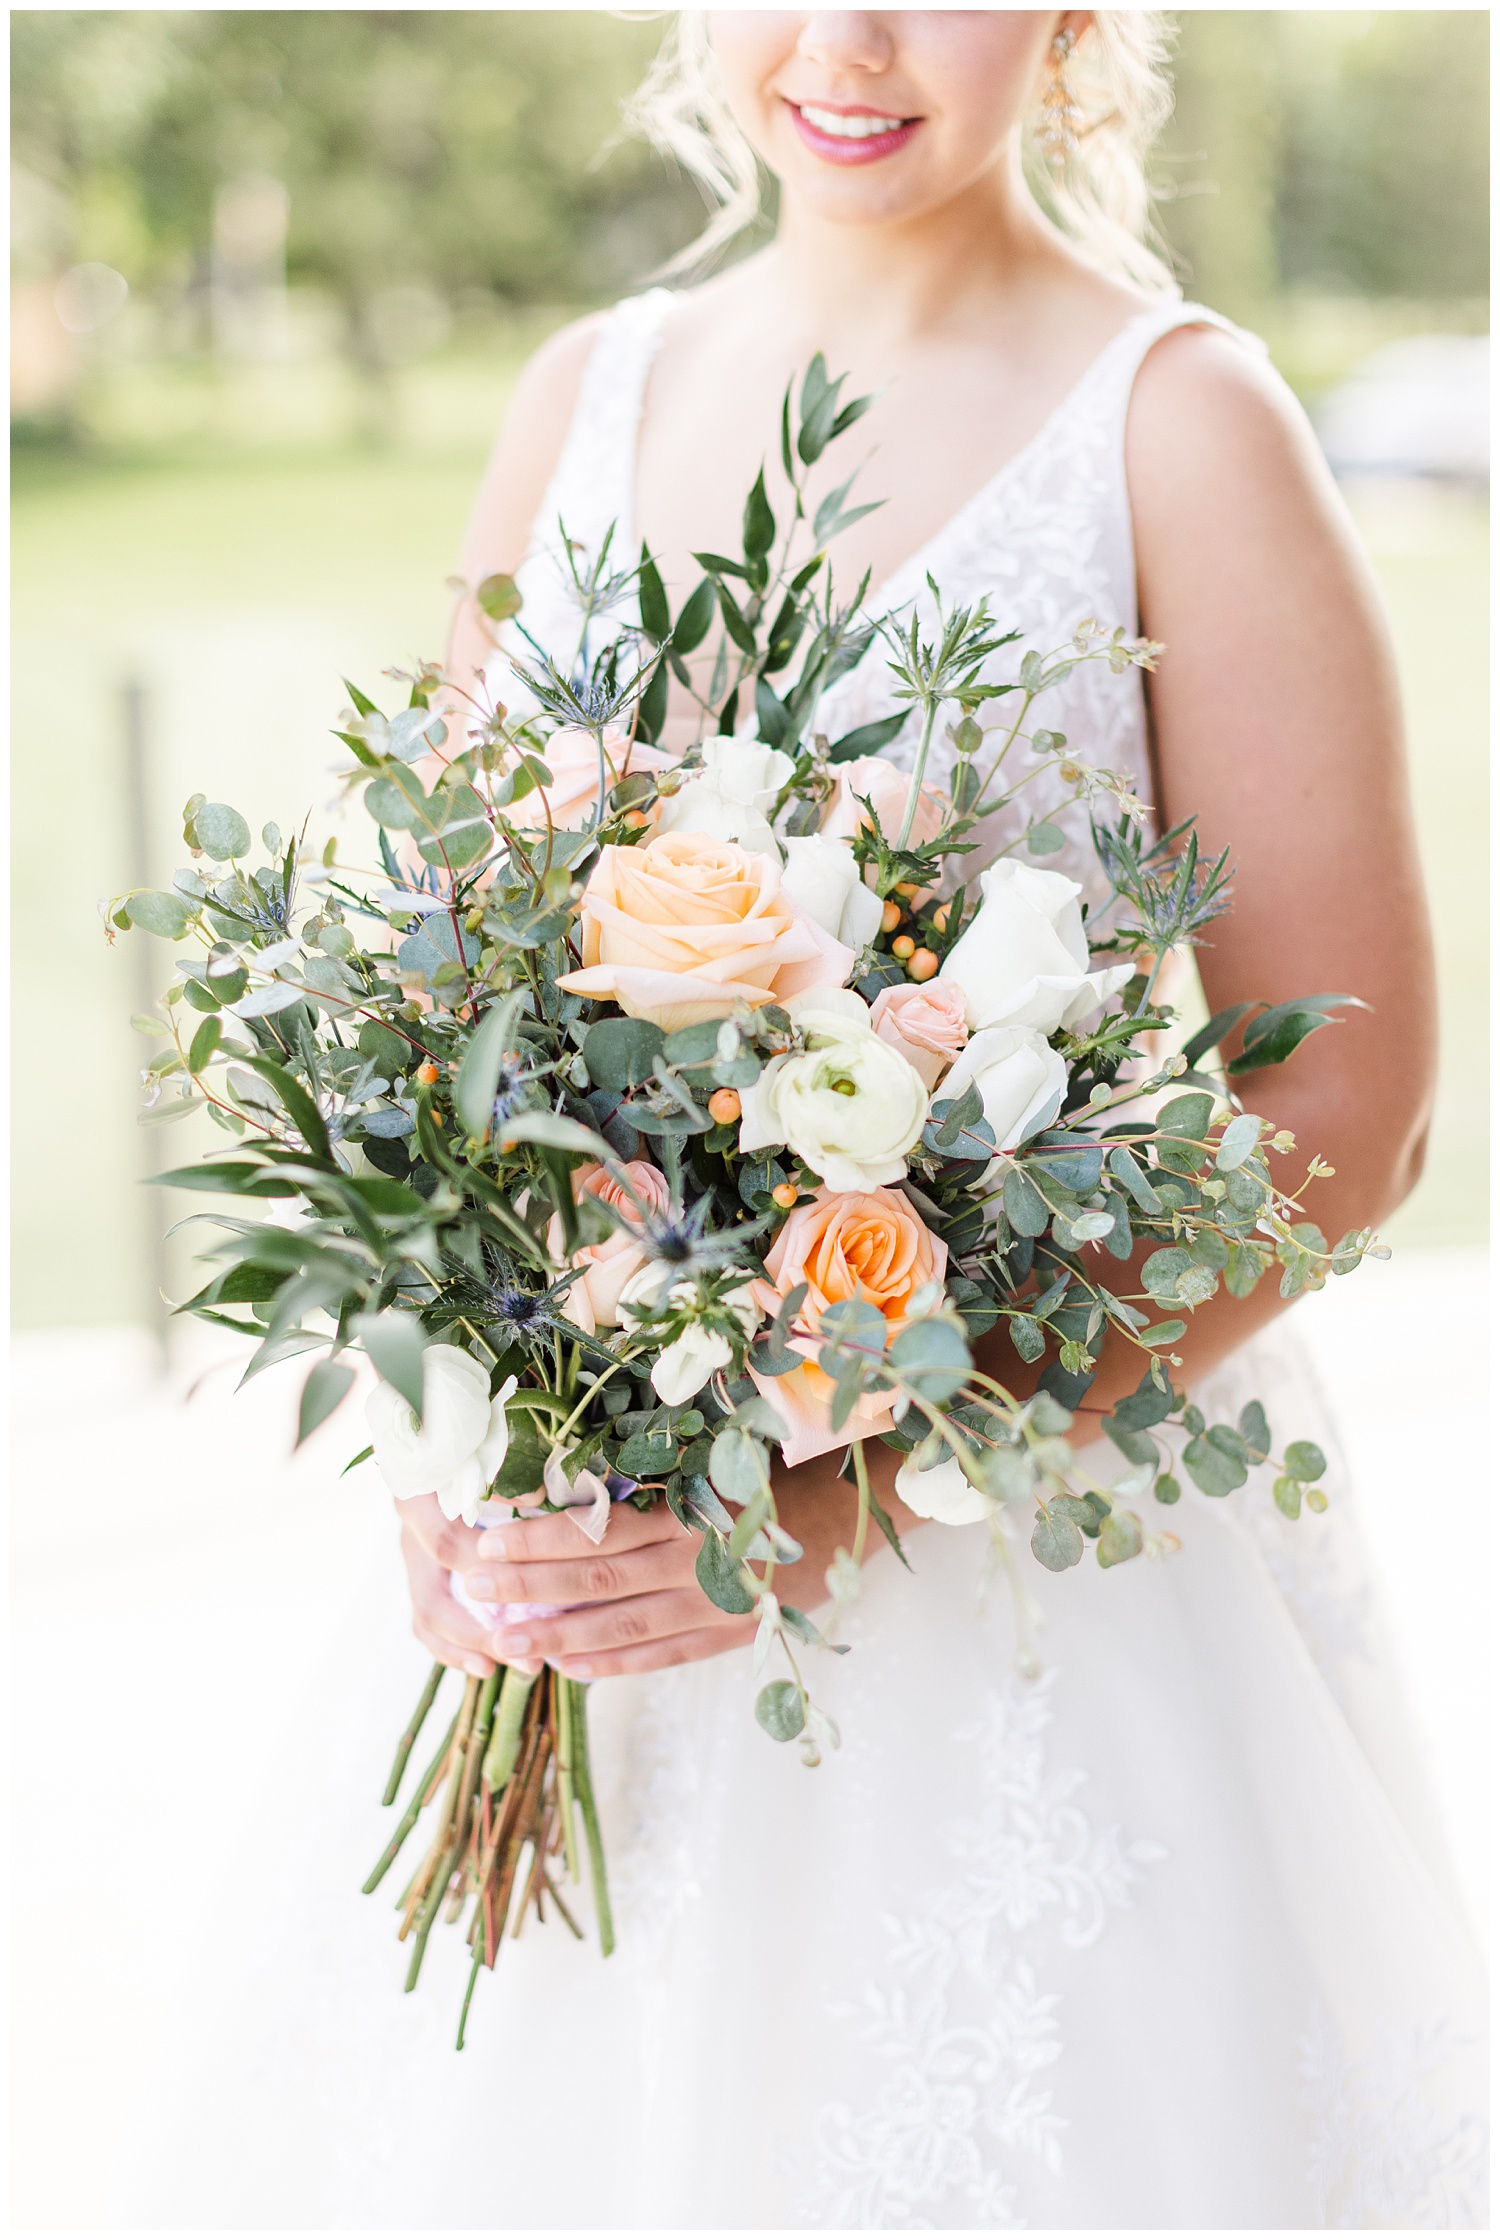 Peach and white rose wedding bouquet with white ranunculus and eucalyptus | CB Studio